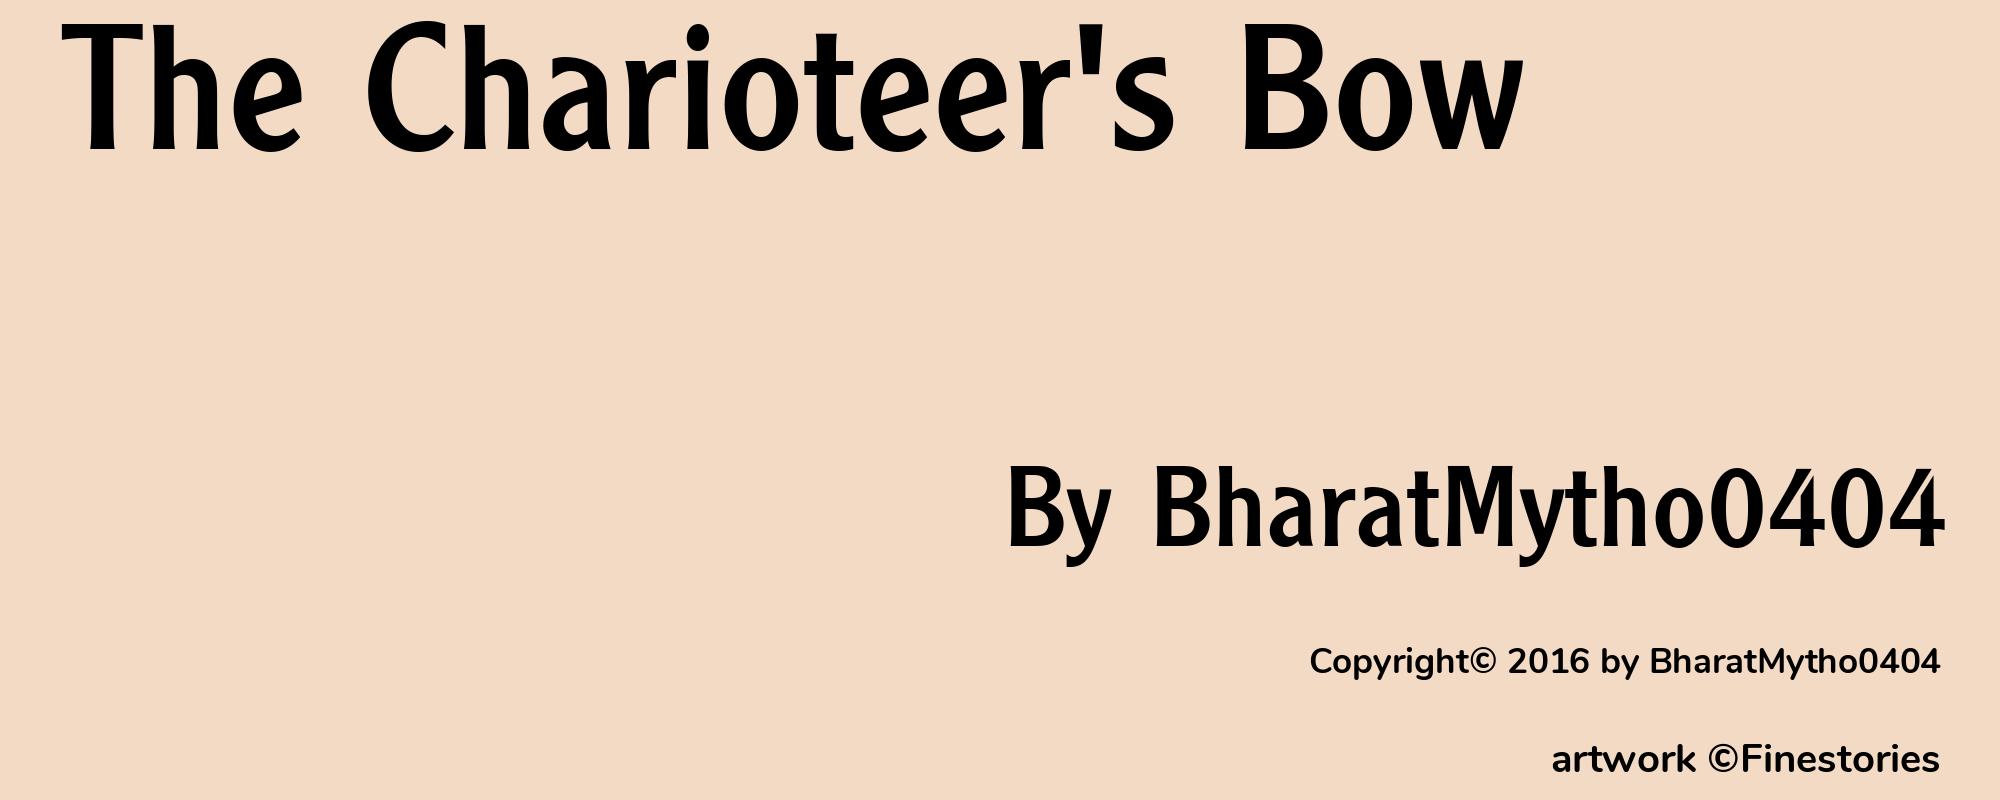 The Charioteer's Bow - Cover